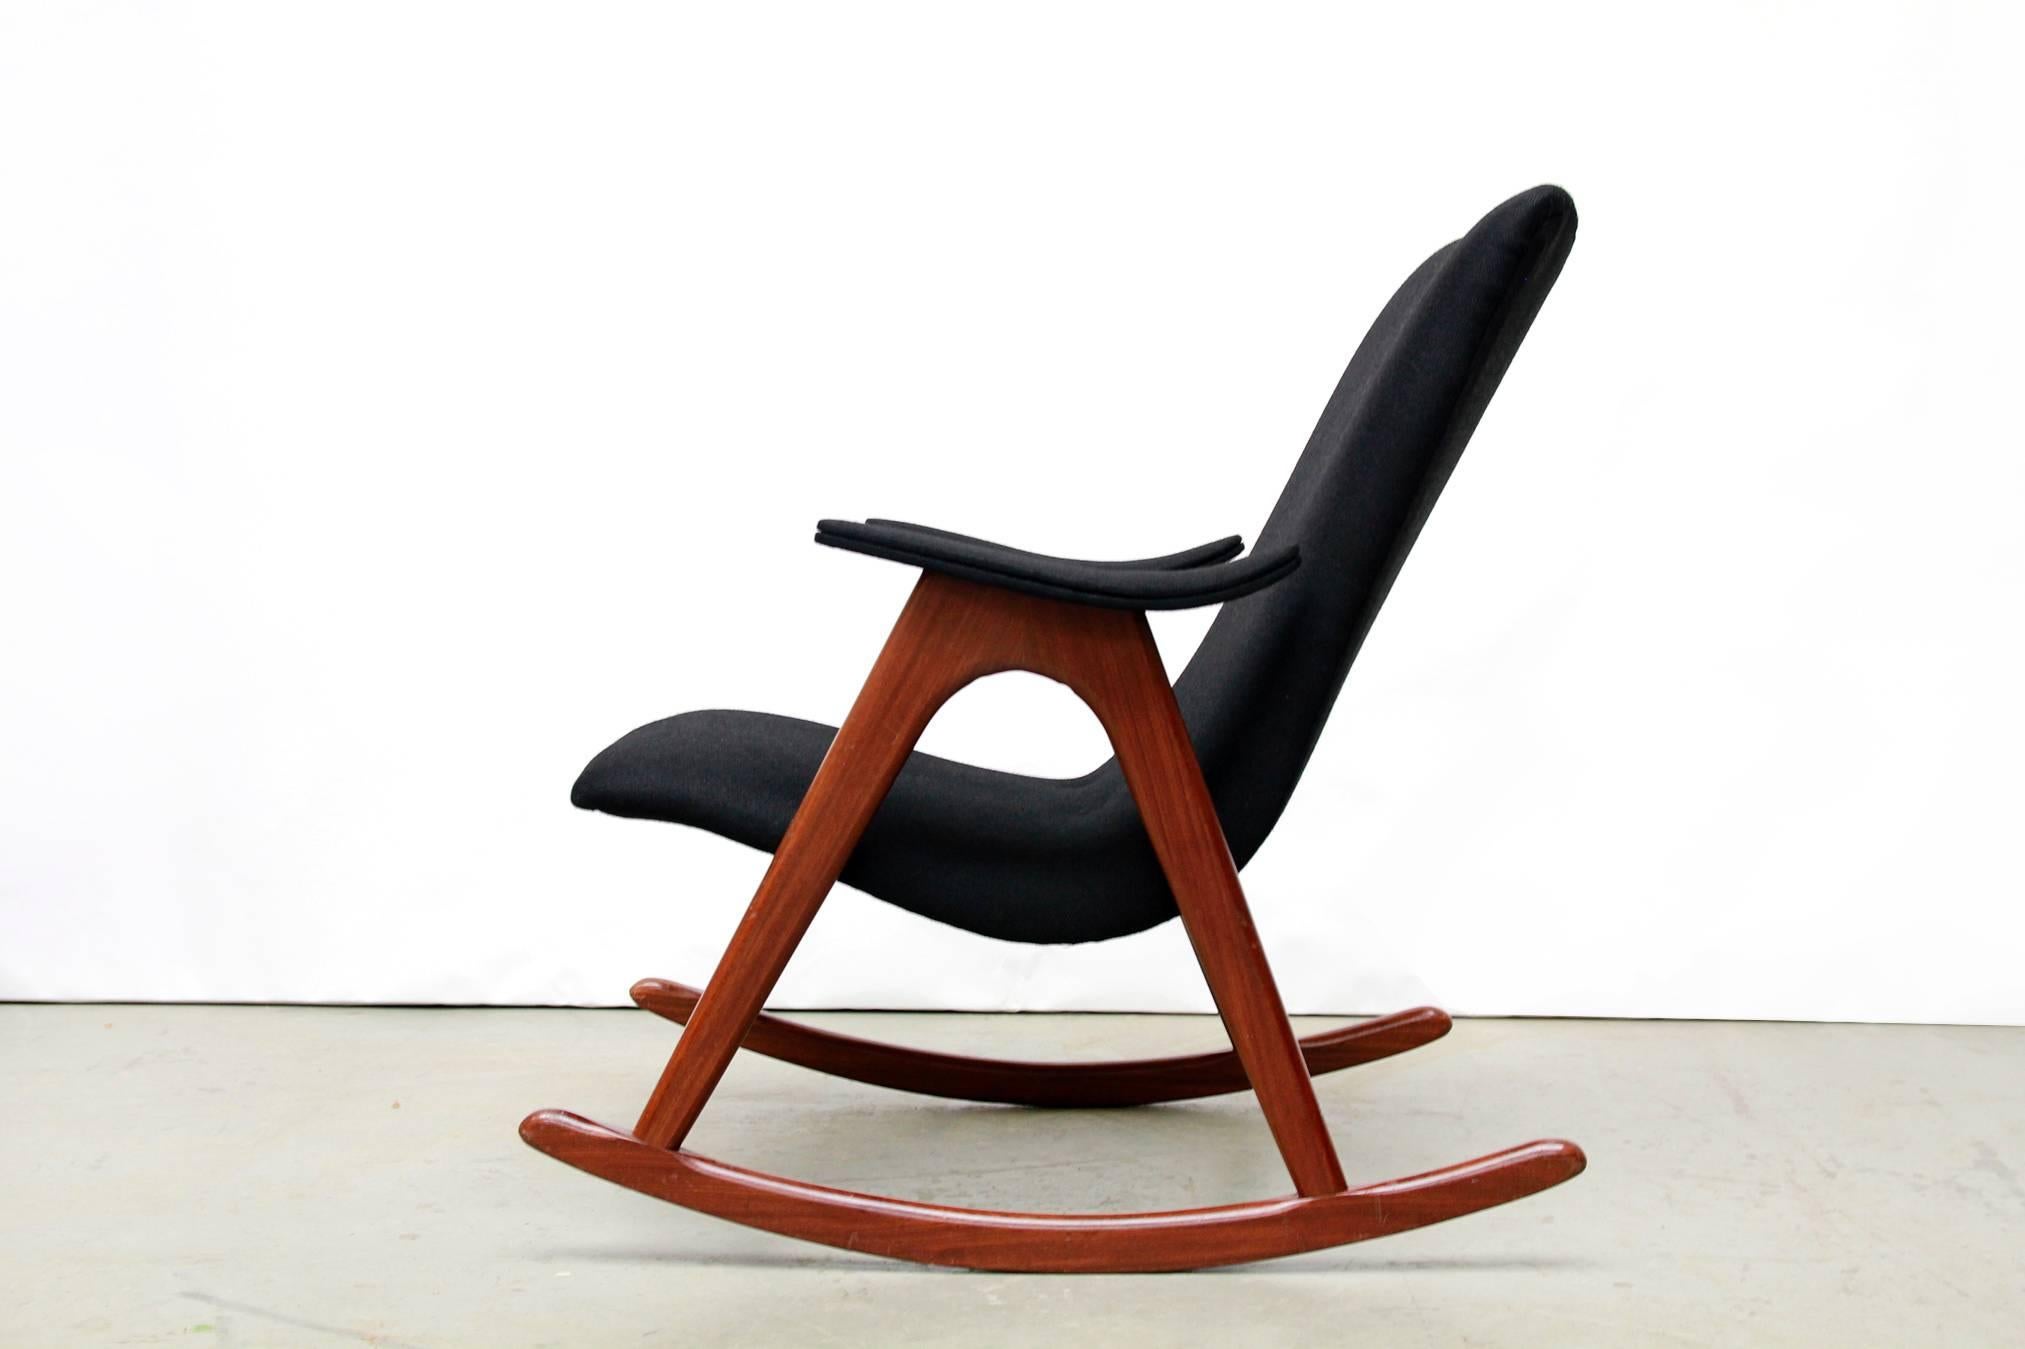 This rocking chair was designed by Louis Van Teeffelen for WéBé in the Netherlands during the 1960s.
This beautiful vintage design armchair is upholstered in a black woolen upholstery.
The frame is made of solid teak and has a swing base.
The